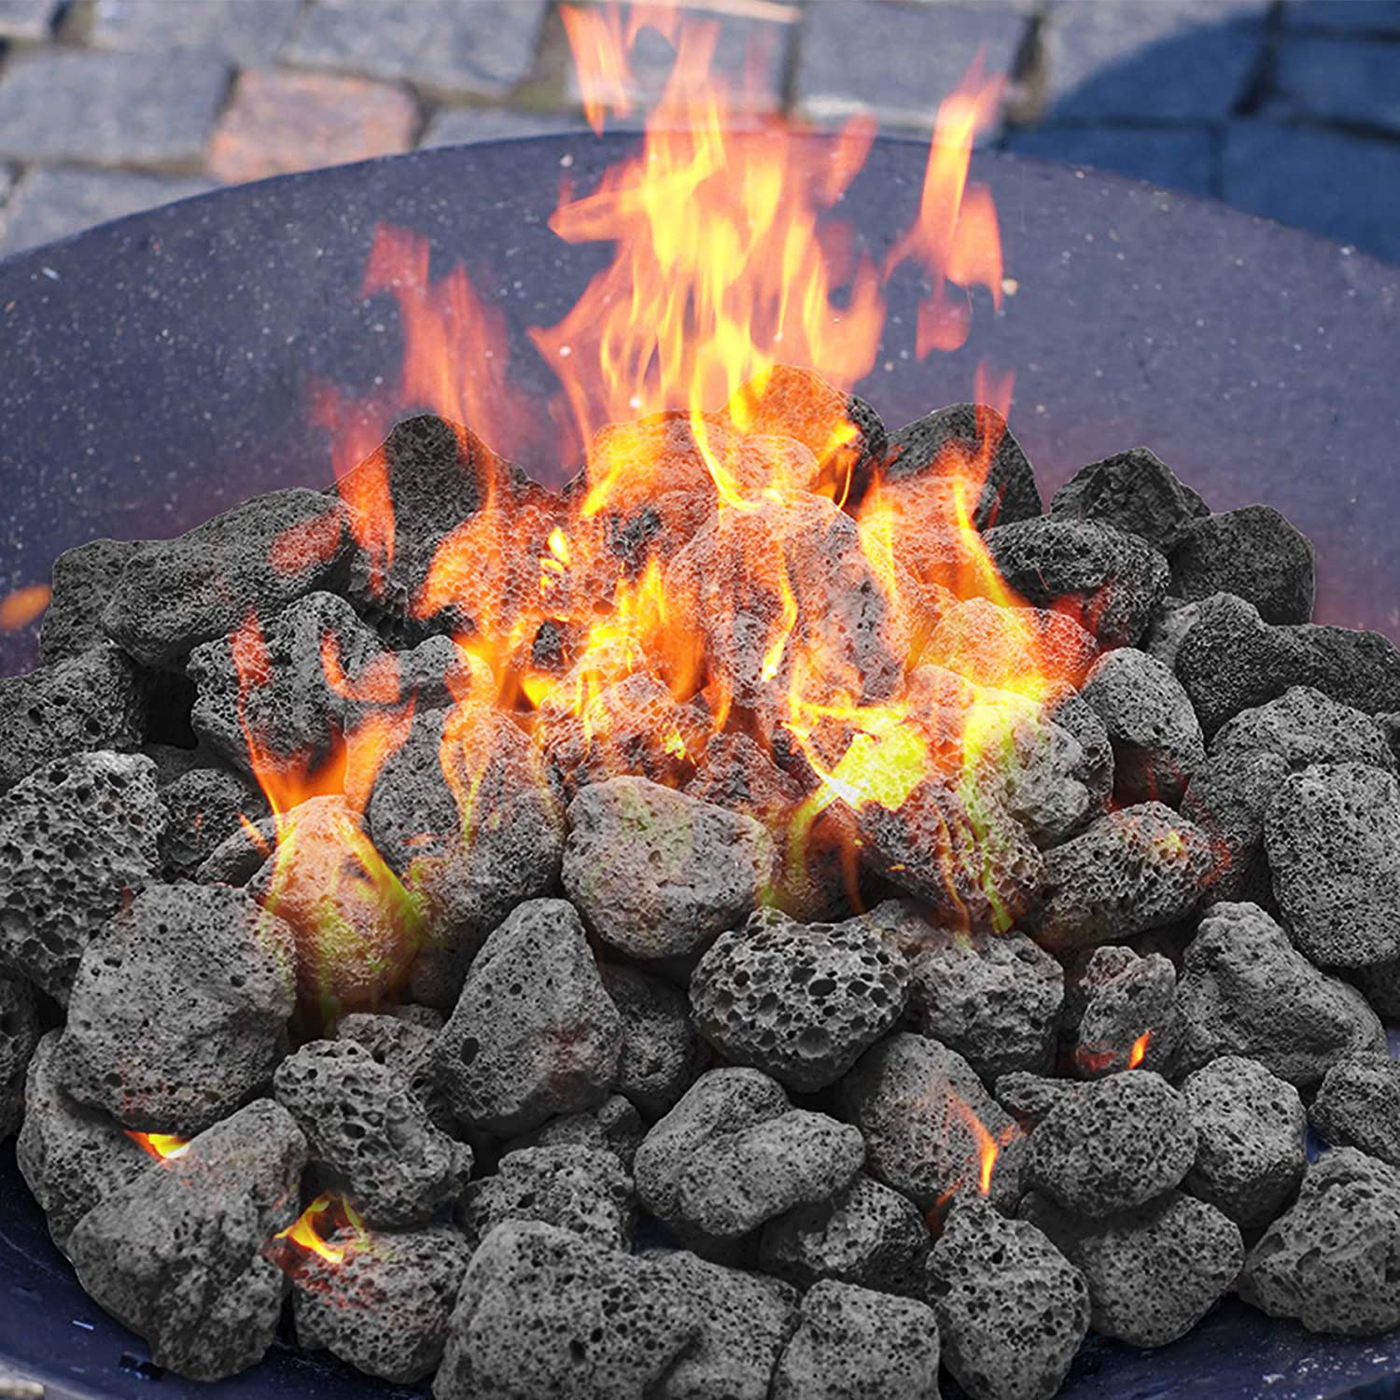 Skyflame 10LB Natural Lava Rocks for Fire Pits, Fire Tables, Fireplaces, Garden Landscaping Decoration, Indoor and Outdoor Use, 3"-5" Sizes, Black